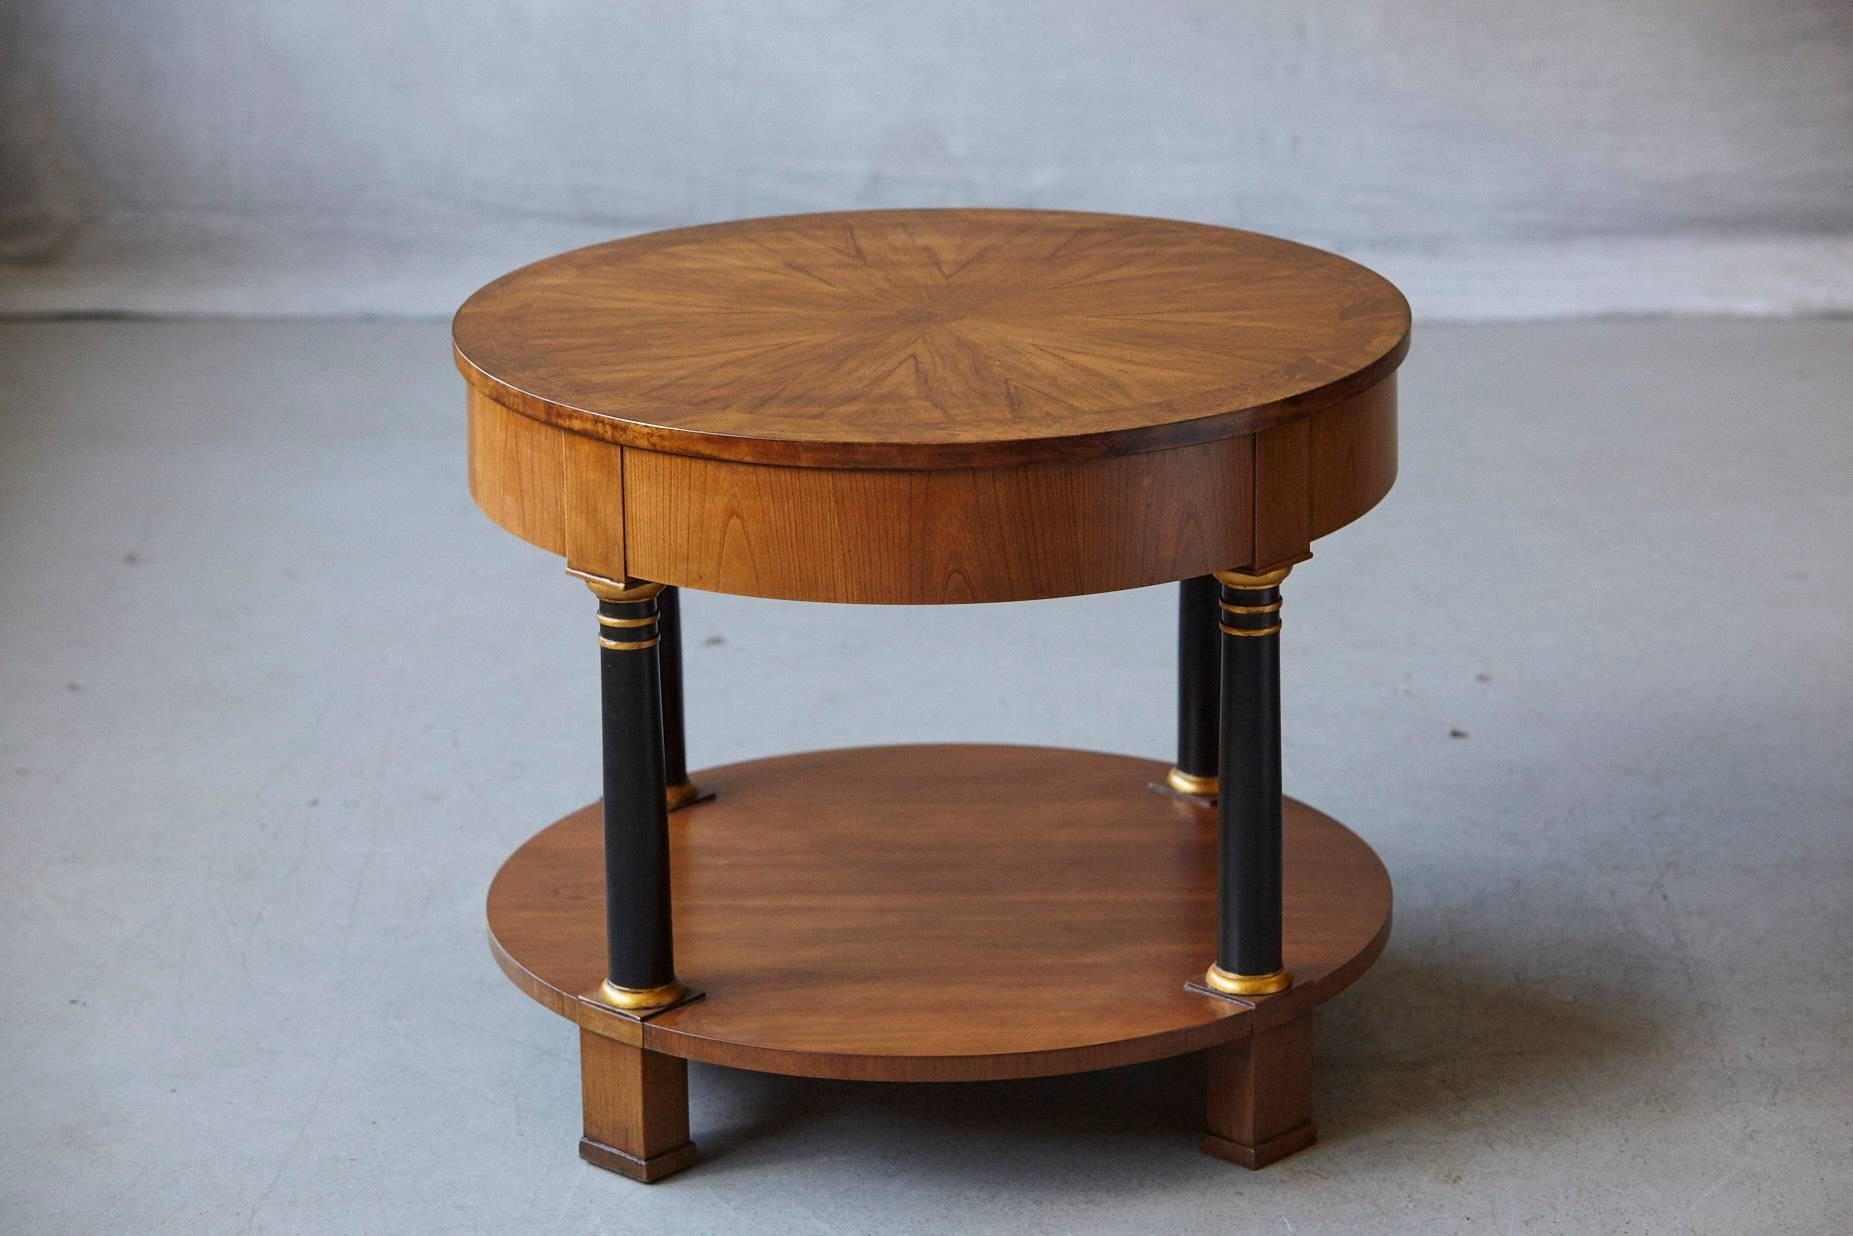 Very fine round Empire style two-tier walnut side or end table with one drawer by Baker Furniture, circa 1970s. Sunburst walnut veneer top, black lacquered columns with guilt accents. Drawer with original brass hardware. The Baker metal sign on the